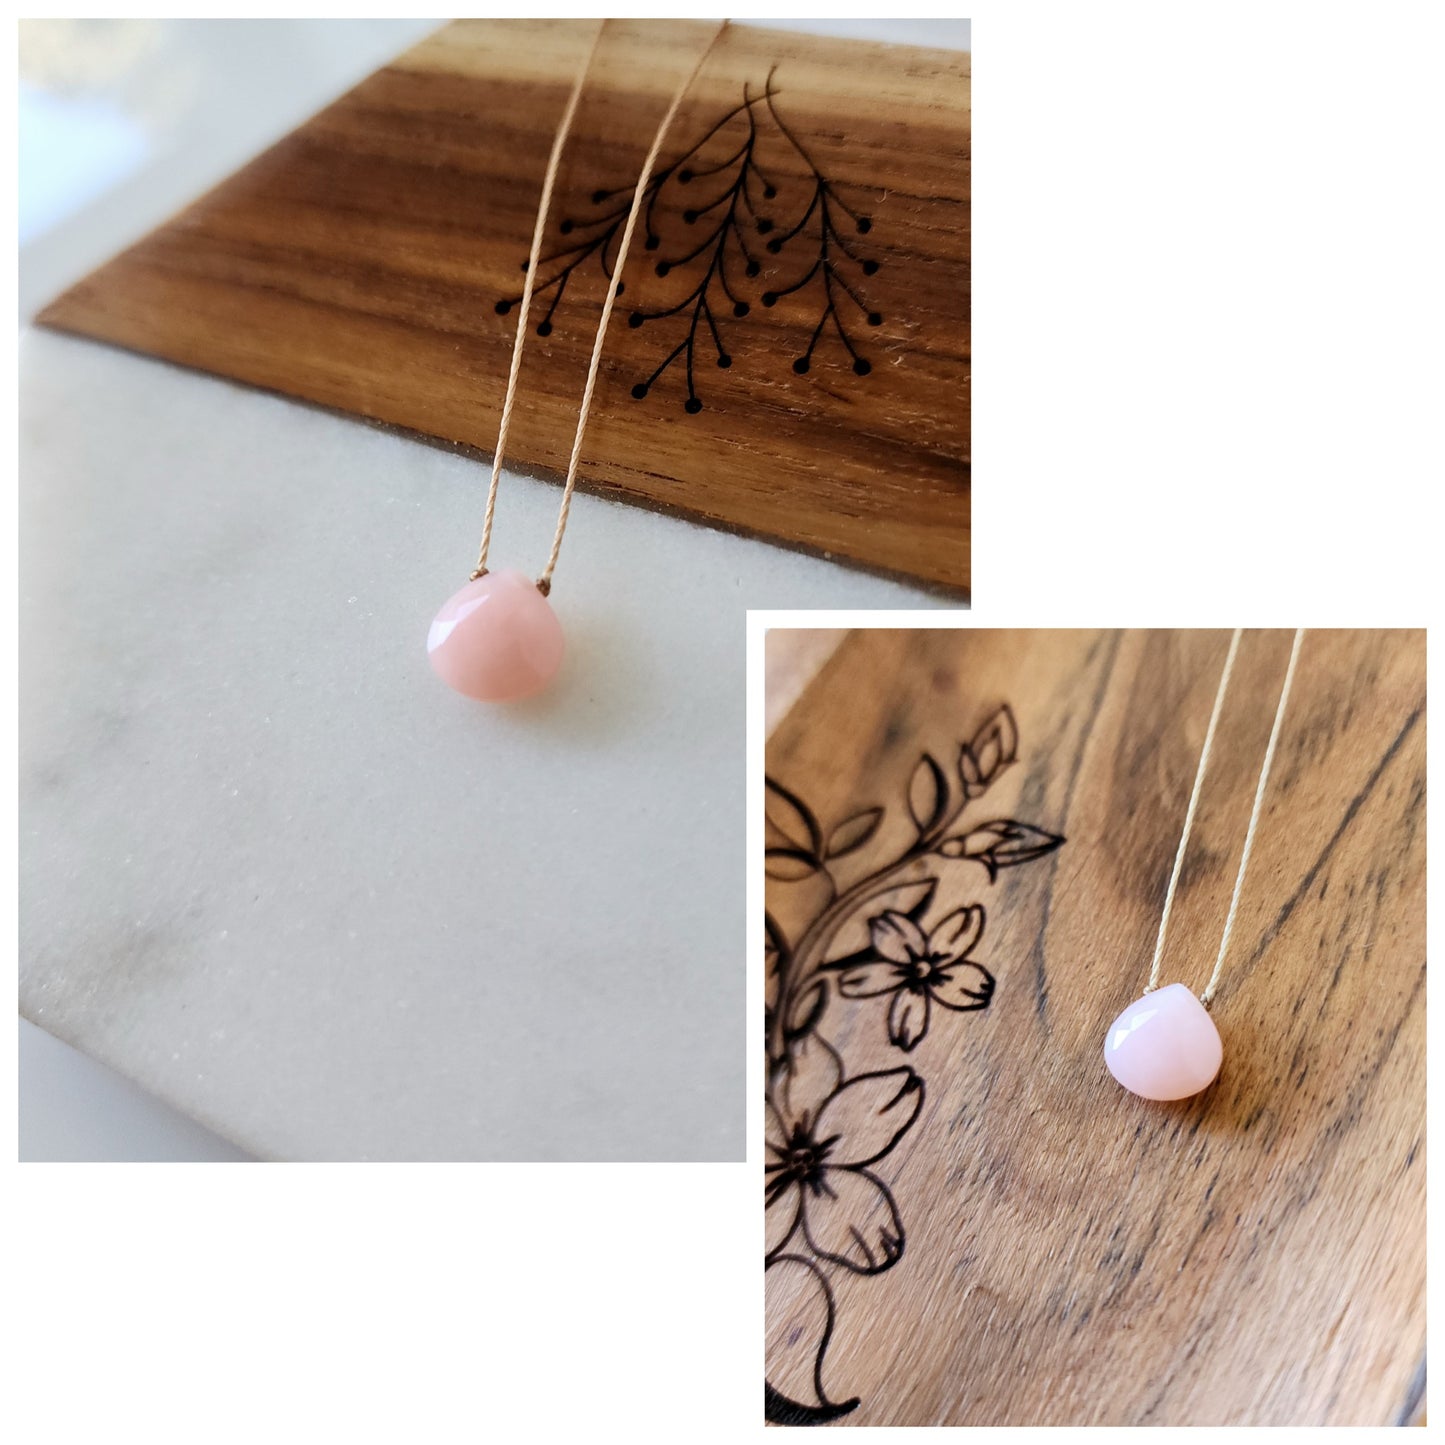 Birthstone Necklaces, January - December